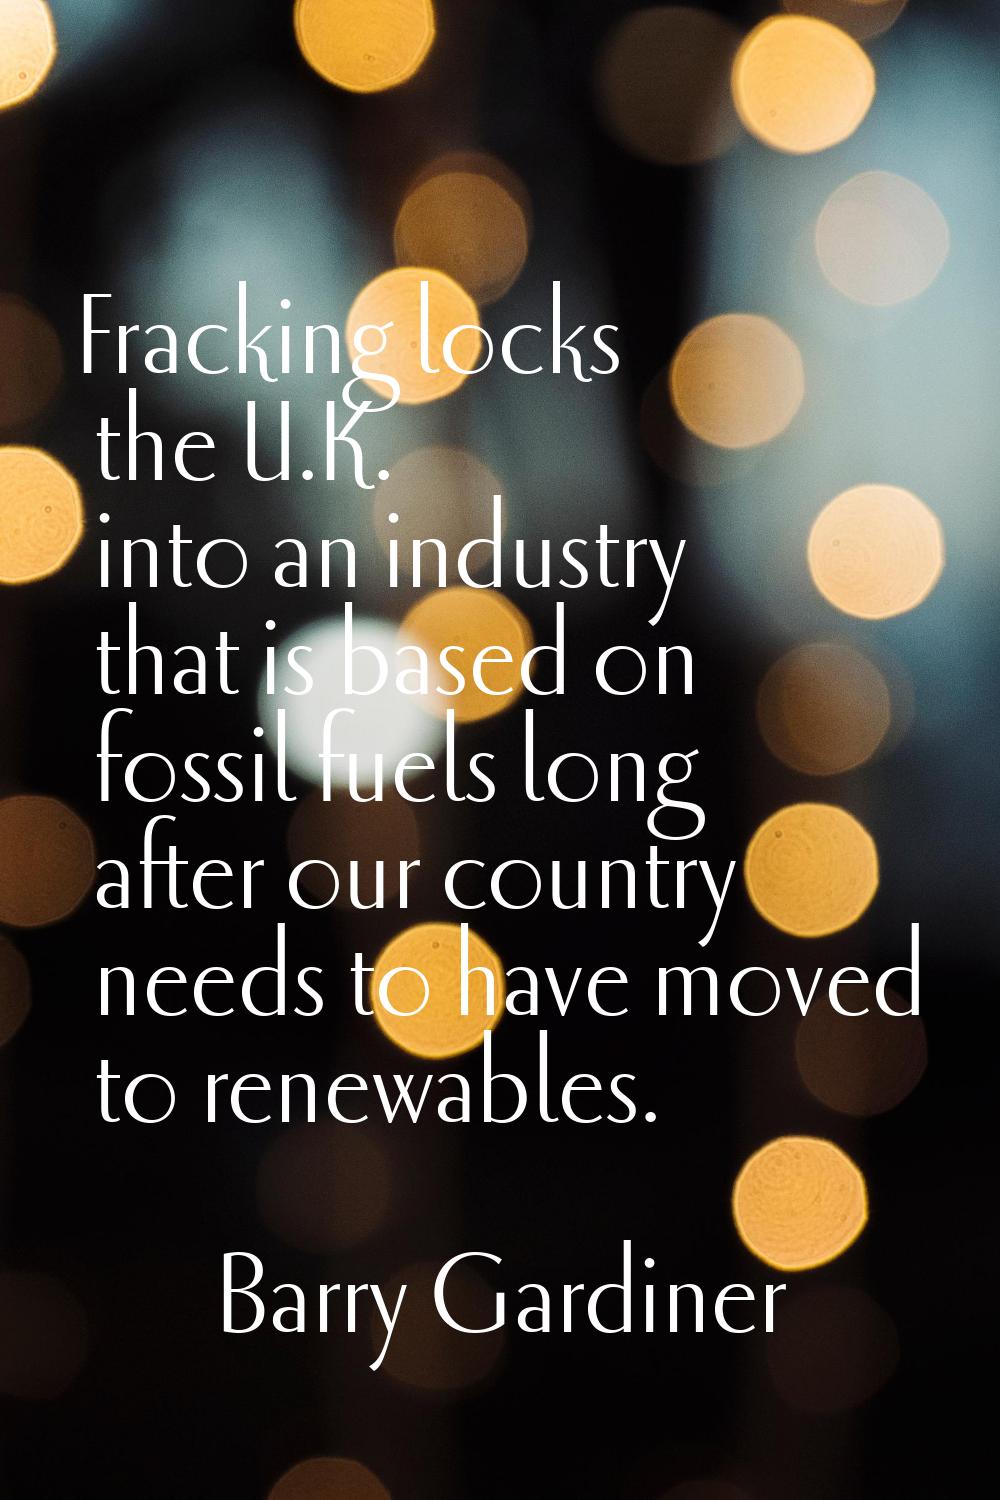 Fracking locks the U.K. into an industry that is based on fossil fuels long after our country needs